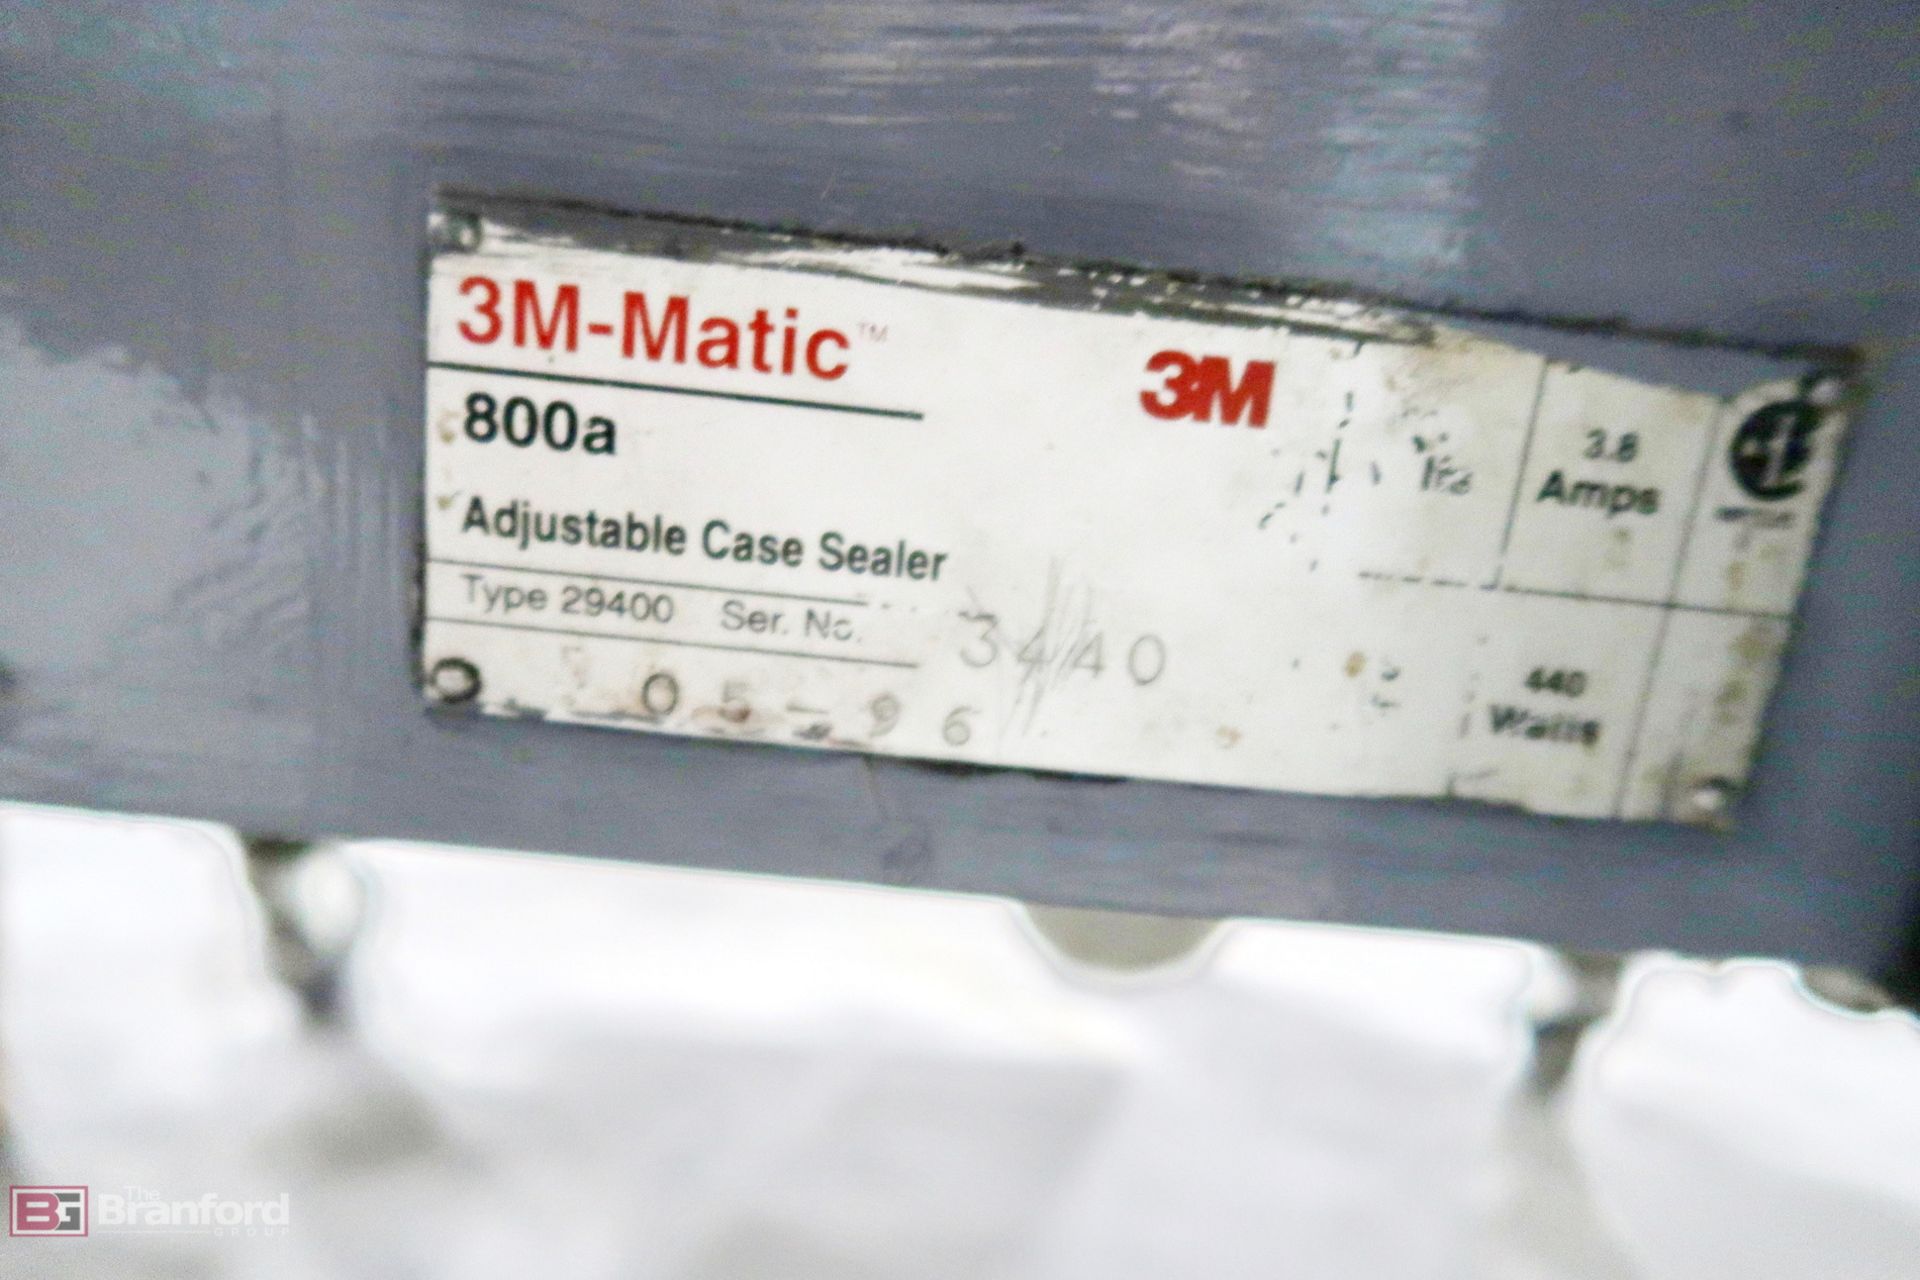 3M - matic case sealing system - Image 4 of 4